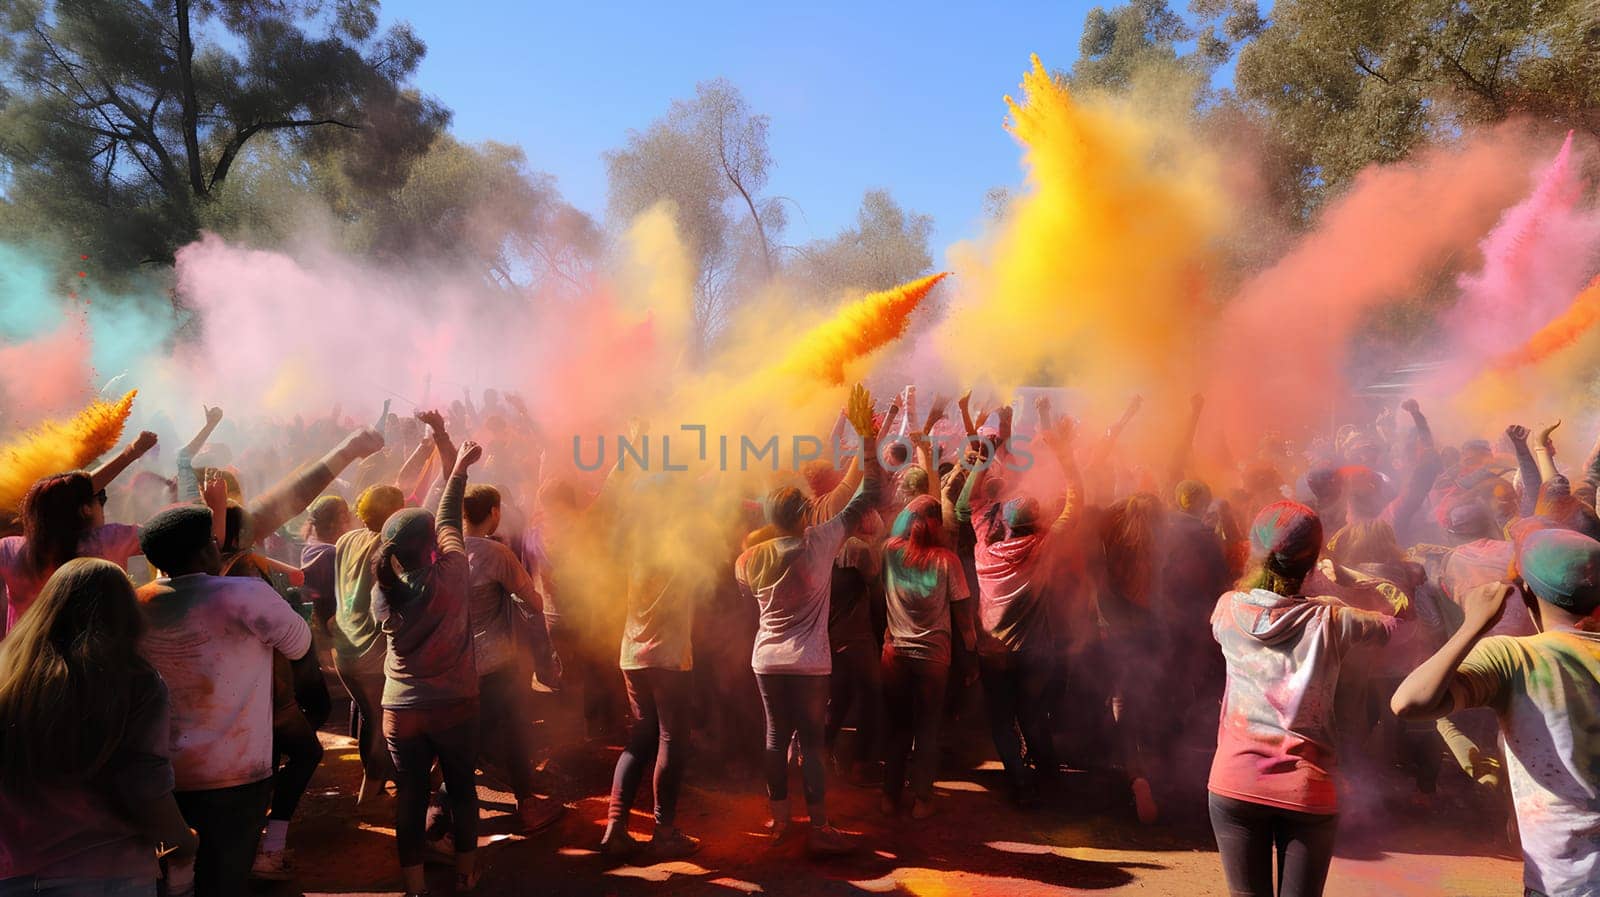 People celebrating the Holi festival of colors in Nepal or India.